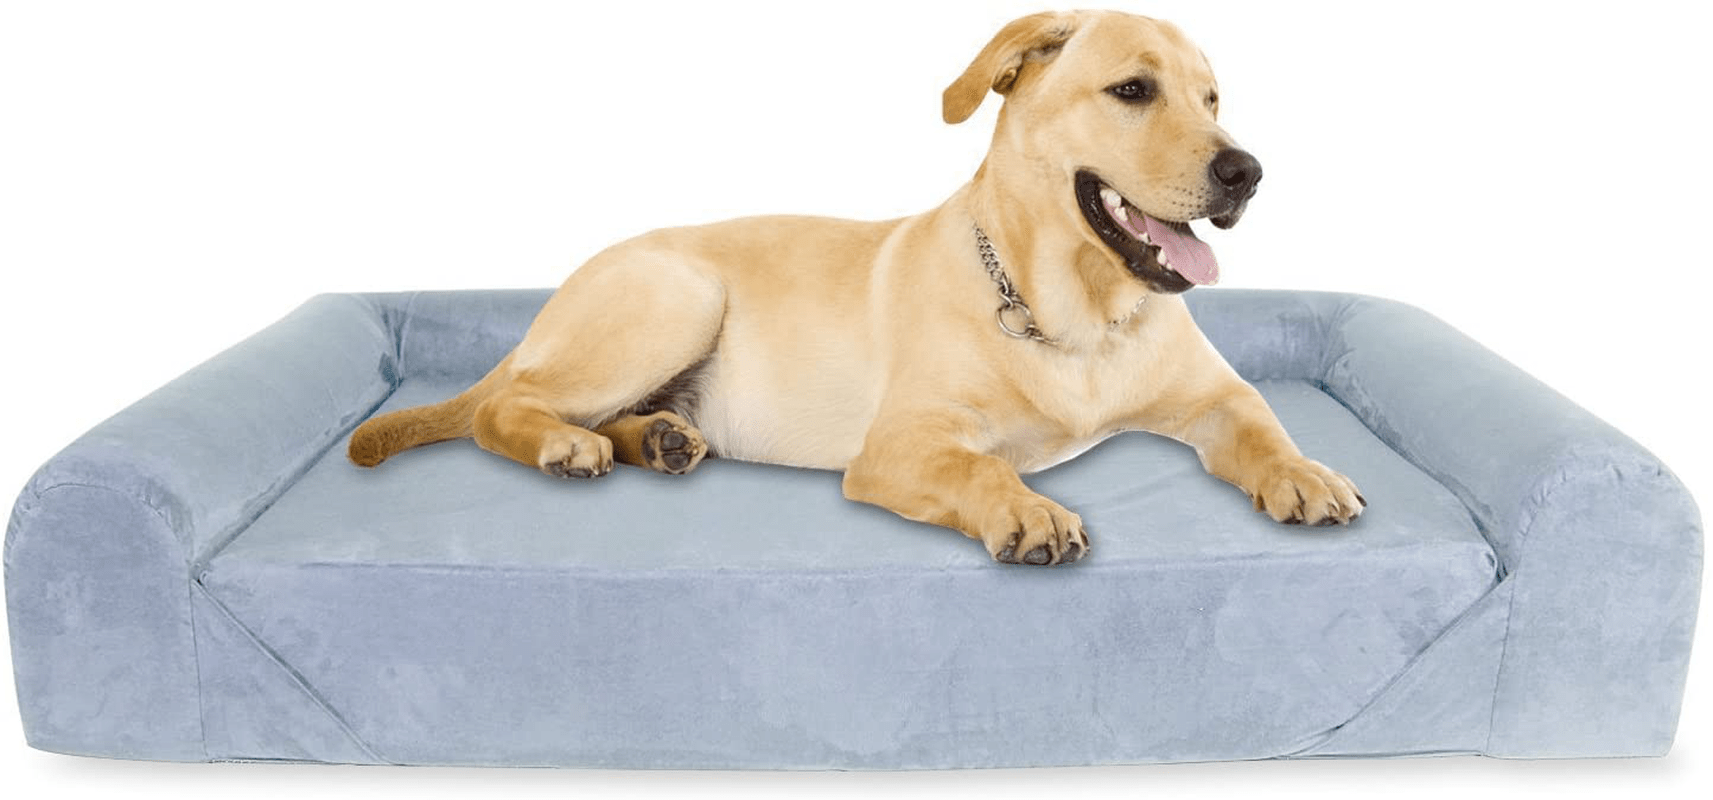 6-Inch Thick High Grade Orthopedic Memory Foam Sofa Dog Bed Easy to Wash Removable Cover with Anti-Slip Bottom. Free Waterproof Liner Included - Jumbo XL 56" X 40" for Large Dogs Animals & Pet Supplies > Pet Supplies > Dog Supplies > Dog Beds KOPEKS Grey Jumbo XXL 